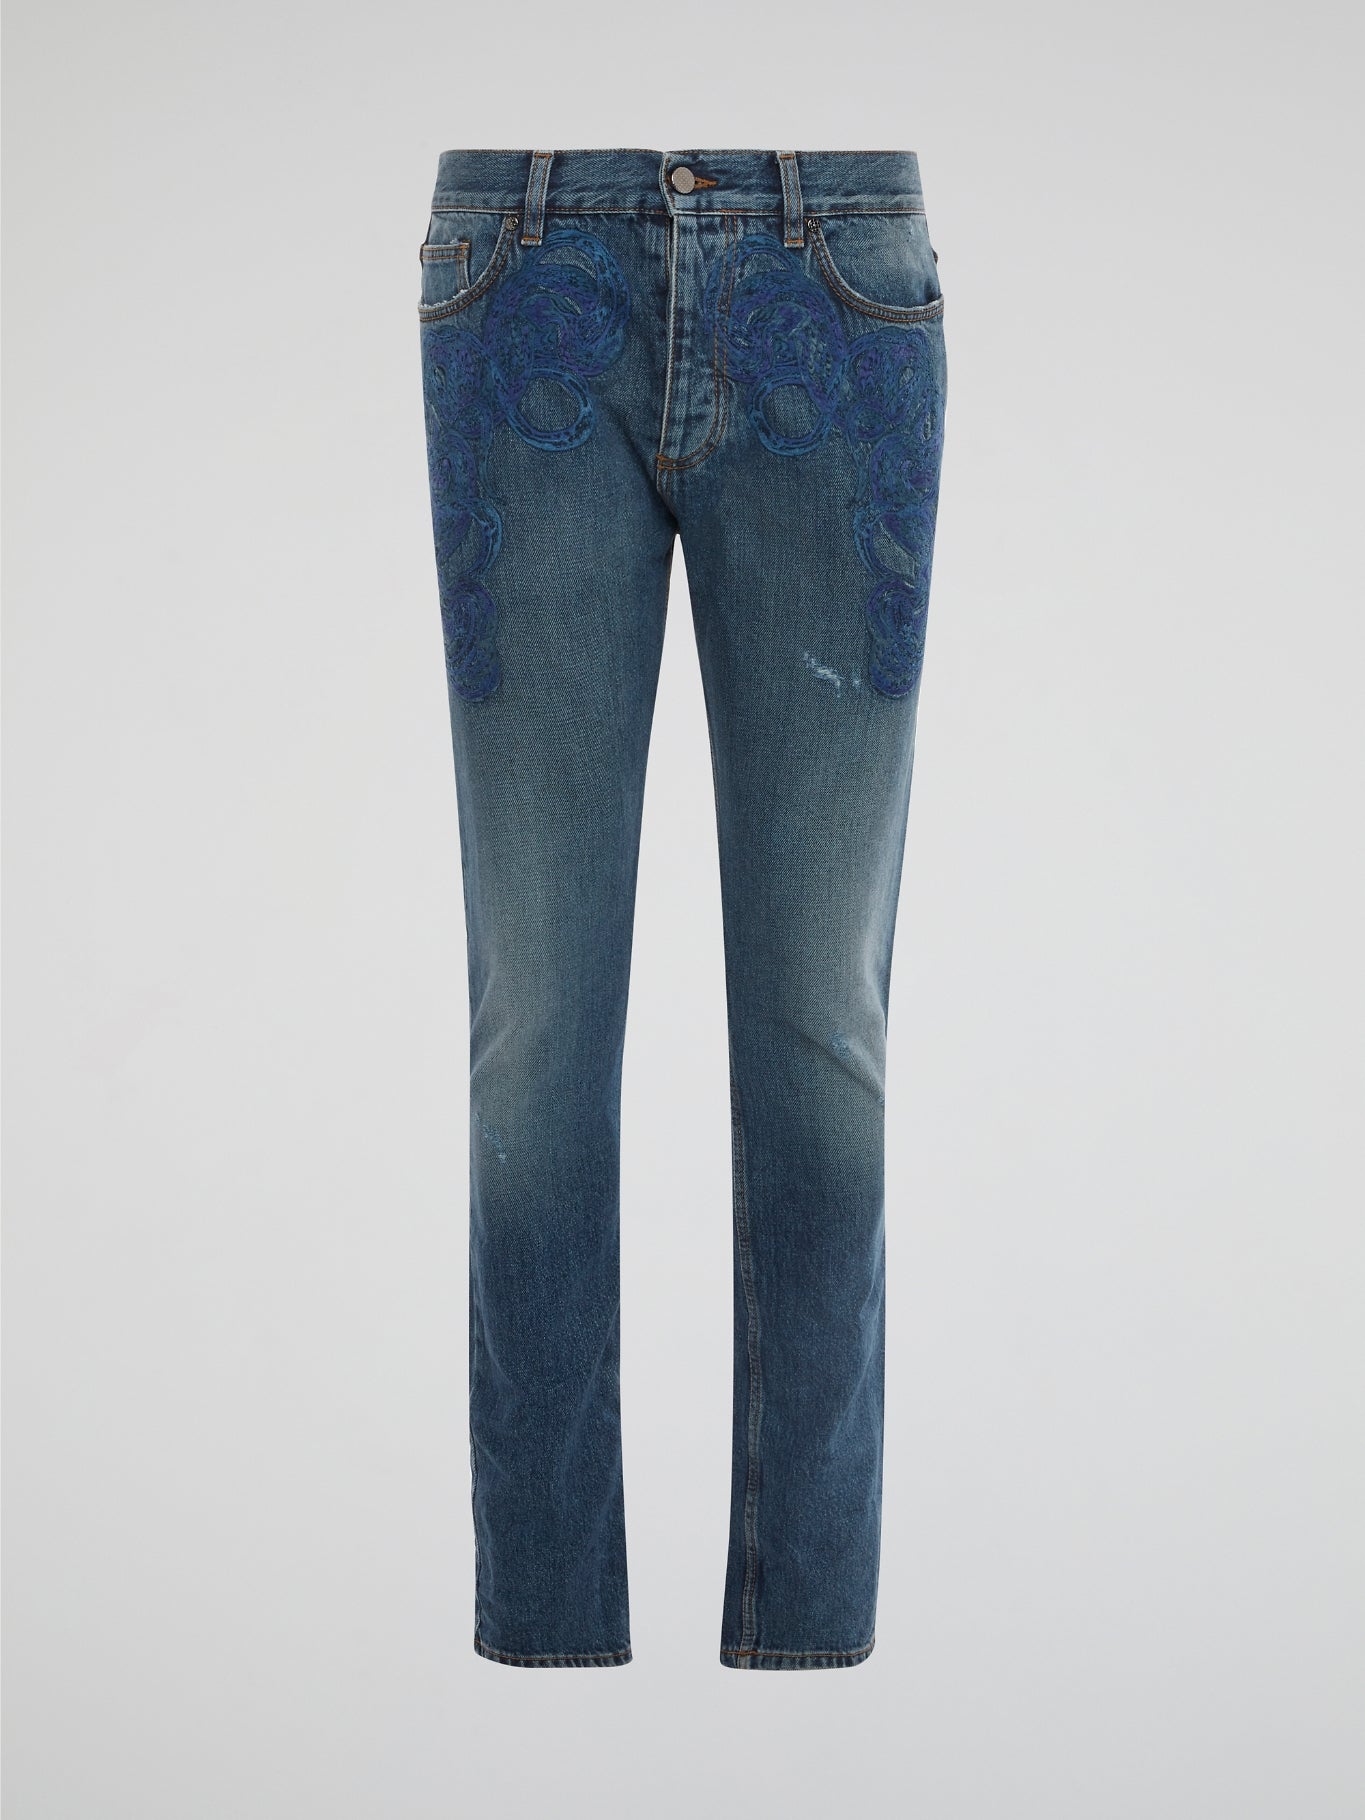 Step out in style and make a statement with these beautifully crafted Embroidered Skinny Jeans by Roberto Cavalli. The intricate embroidery detail adds a touch of elegance to these must-have denim. Elevate your denim game and turn heads wherever you go in these fabulous designer jeans.